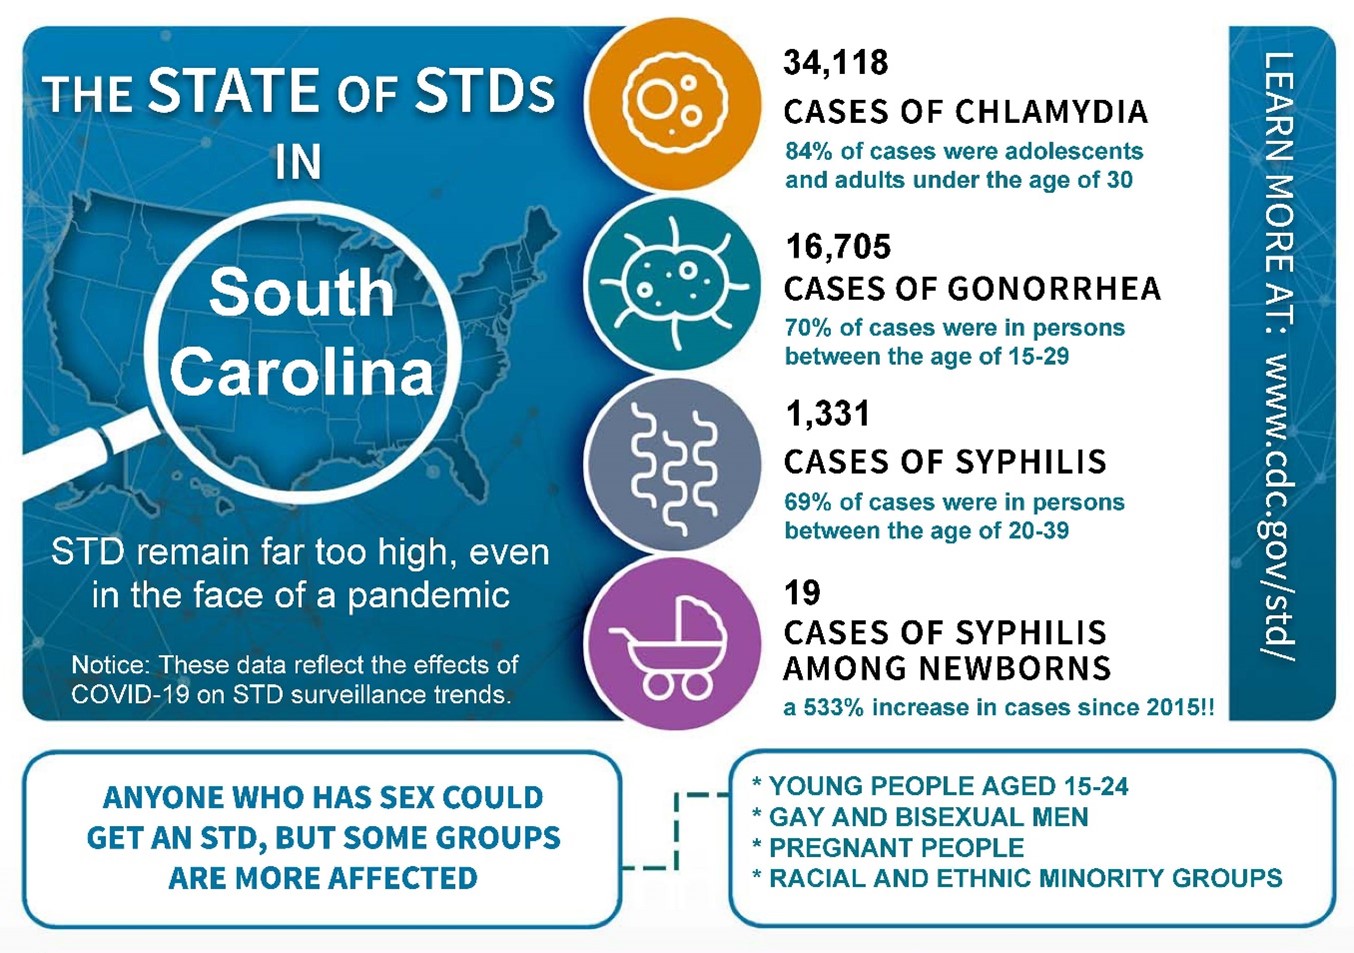 CDC Graphic of the State of STDs in South Carolina